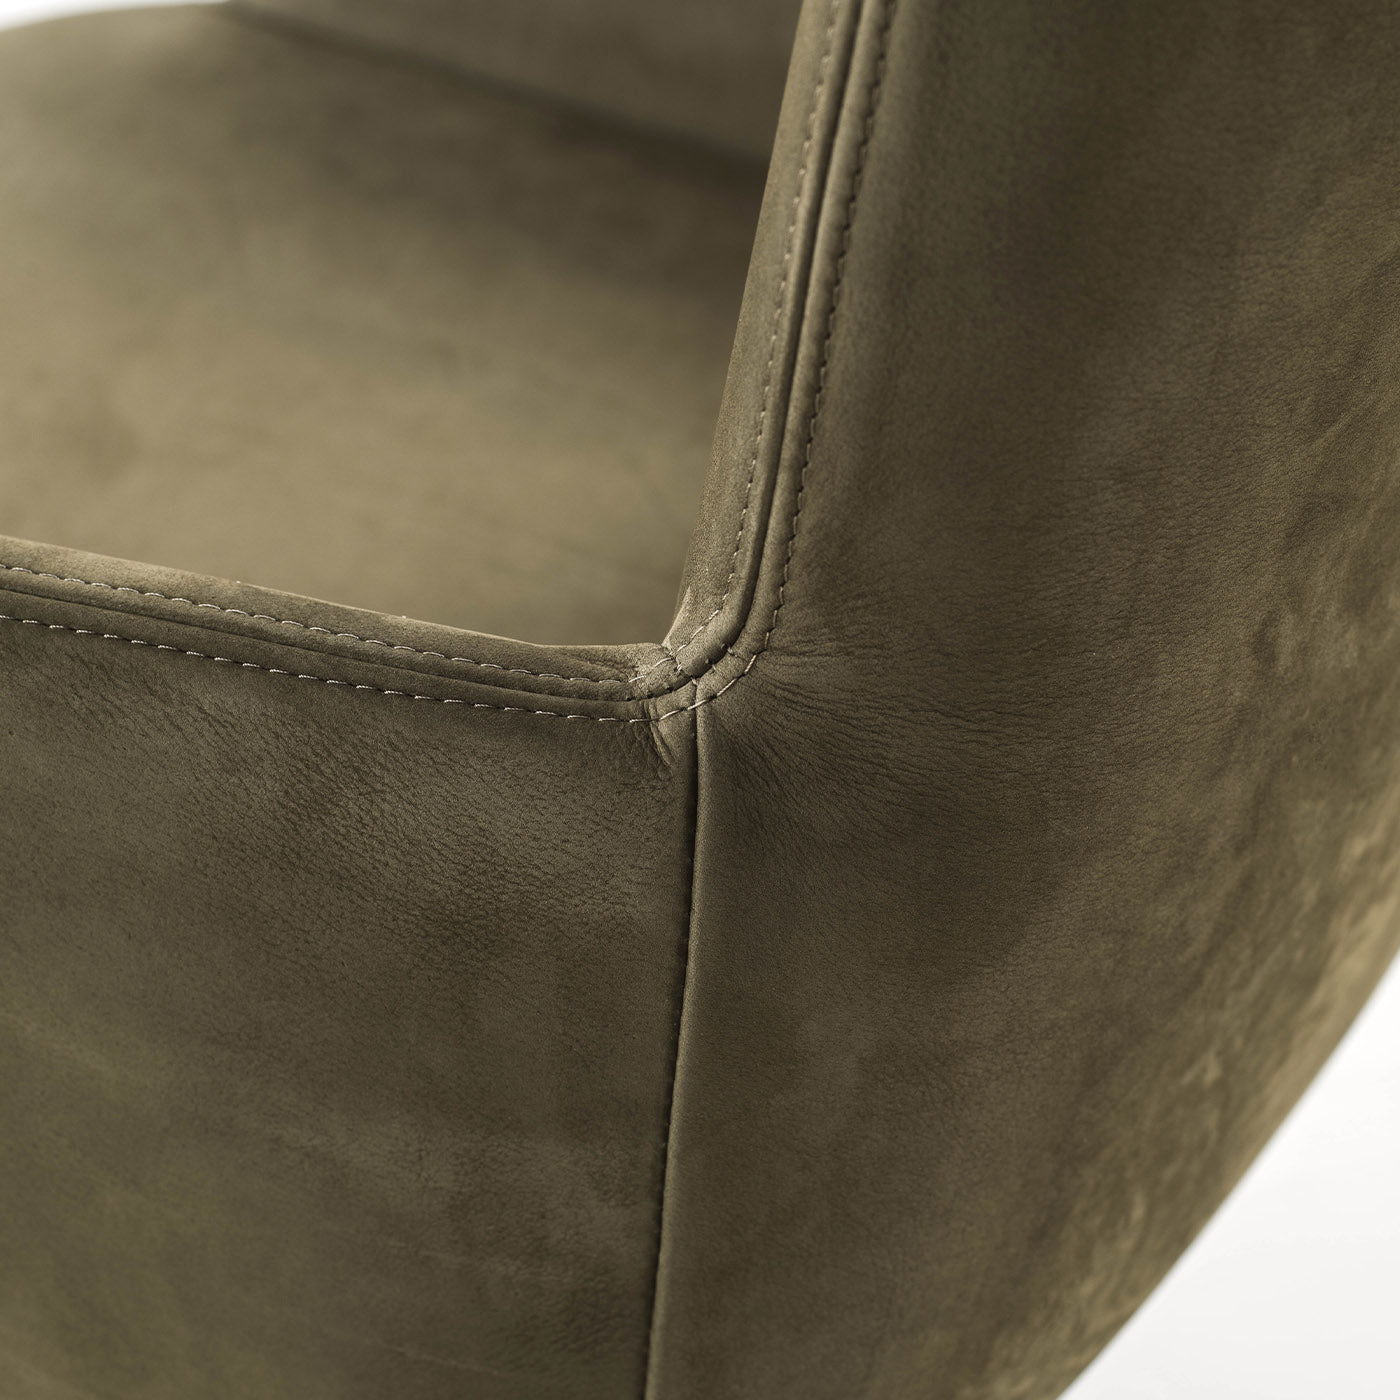 Materia Soft Swivel Sage-Green Chair With Armrests by Claudio Bellini - Alternative view 1